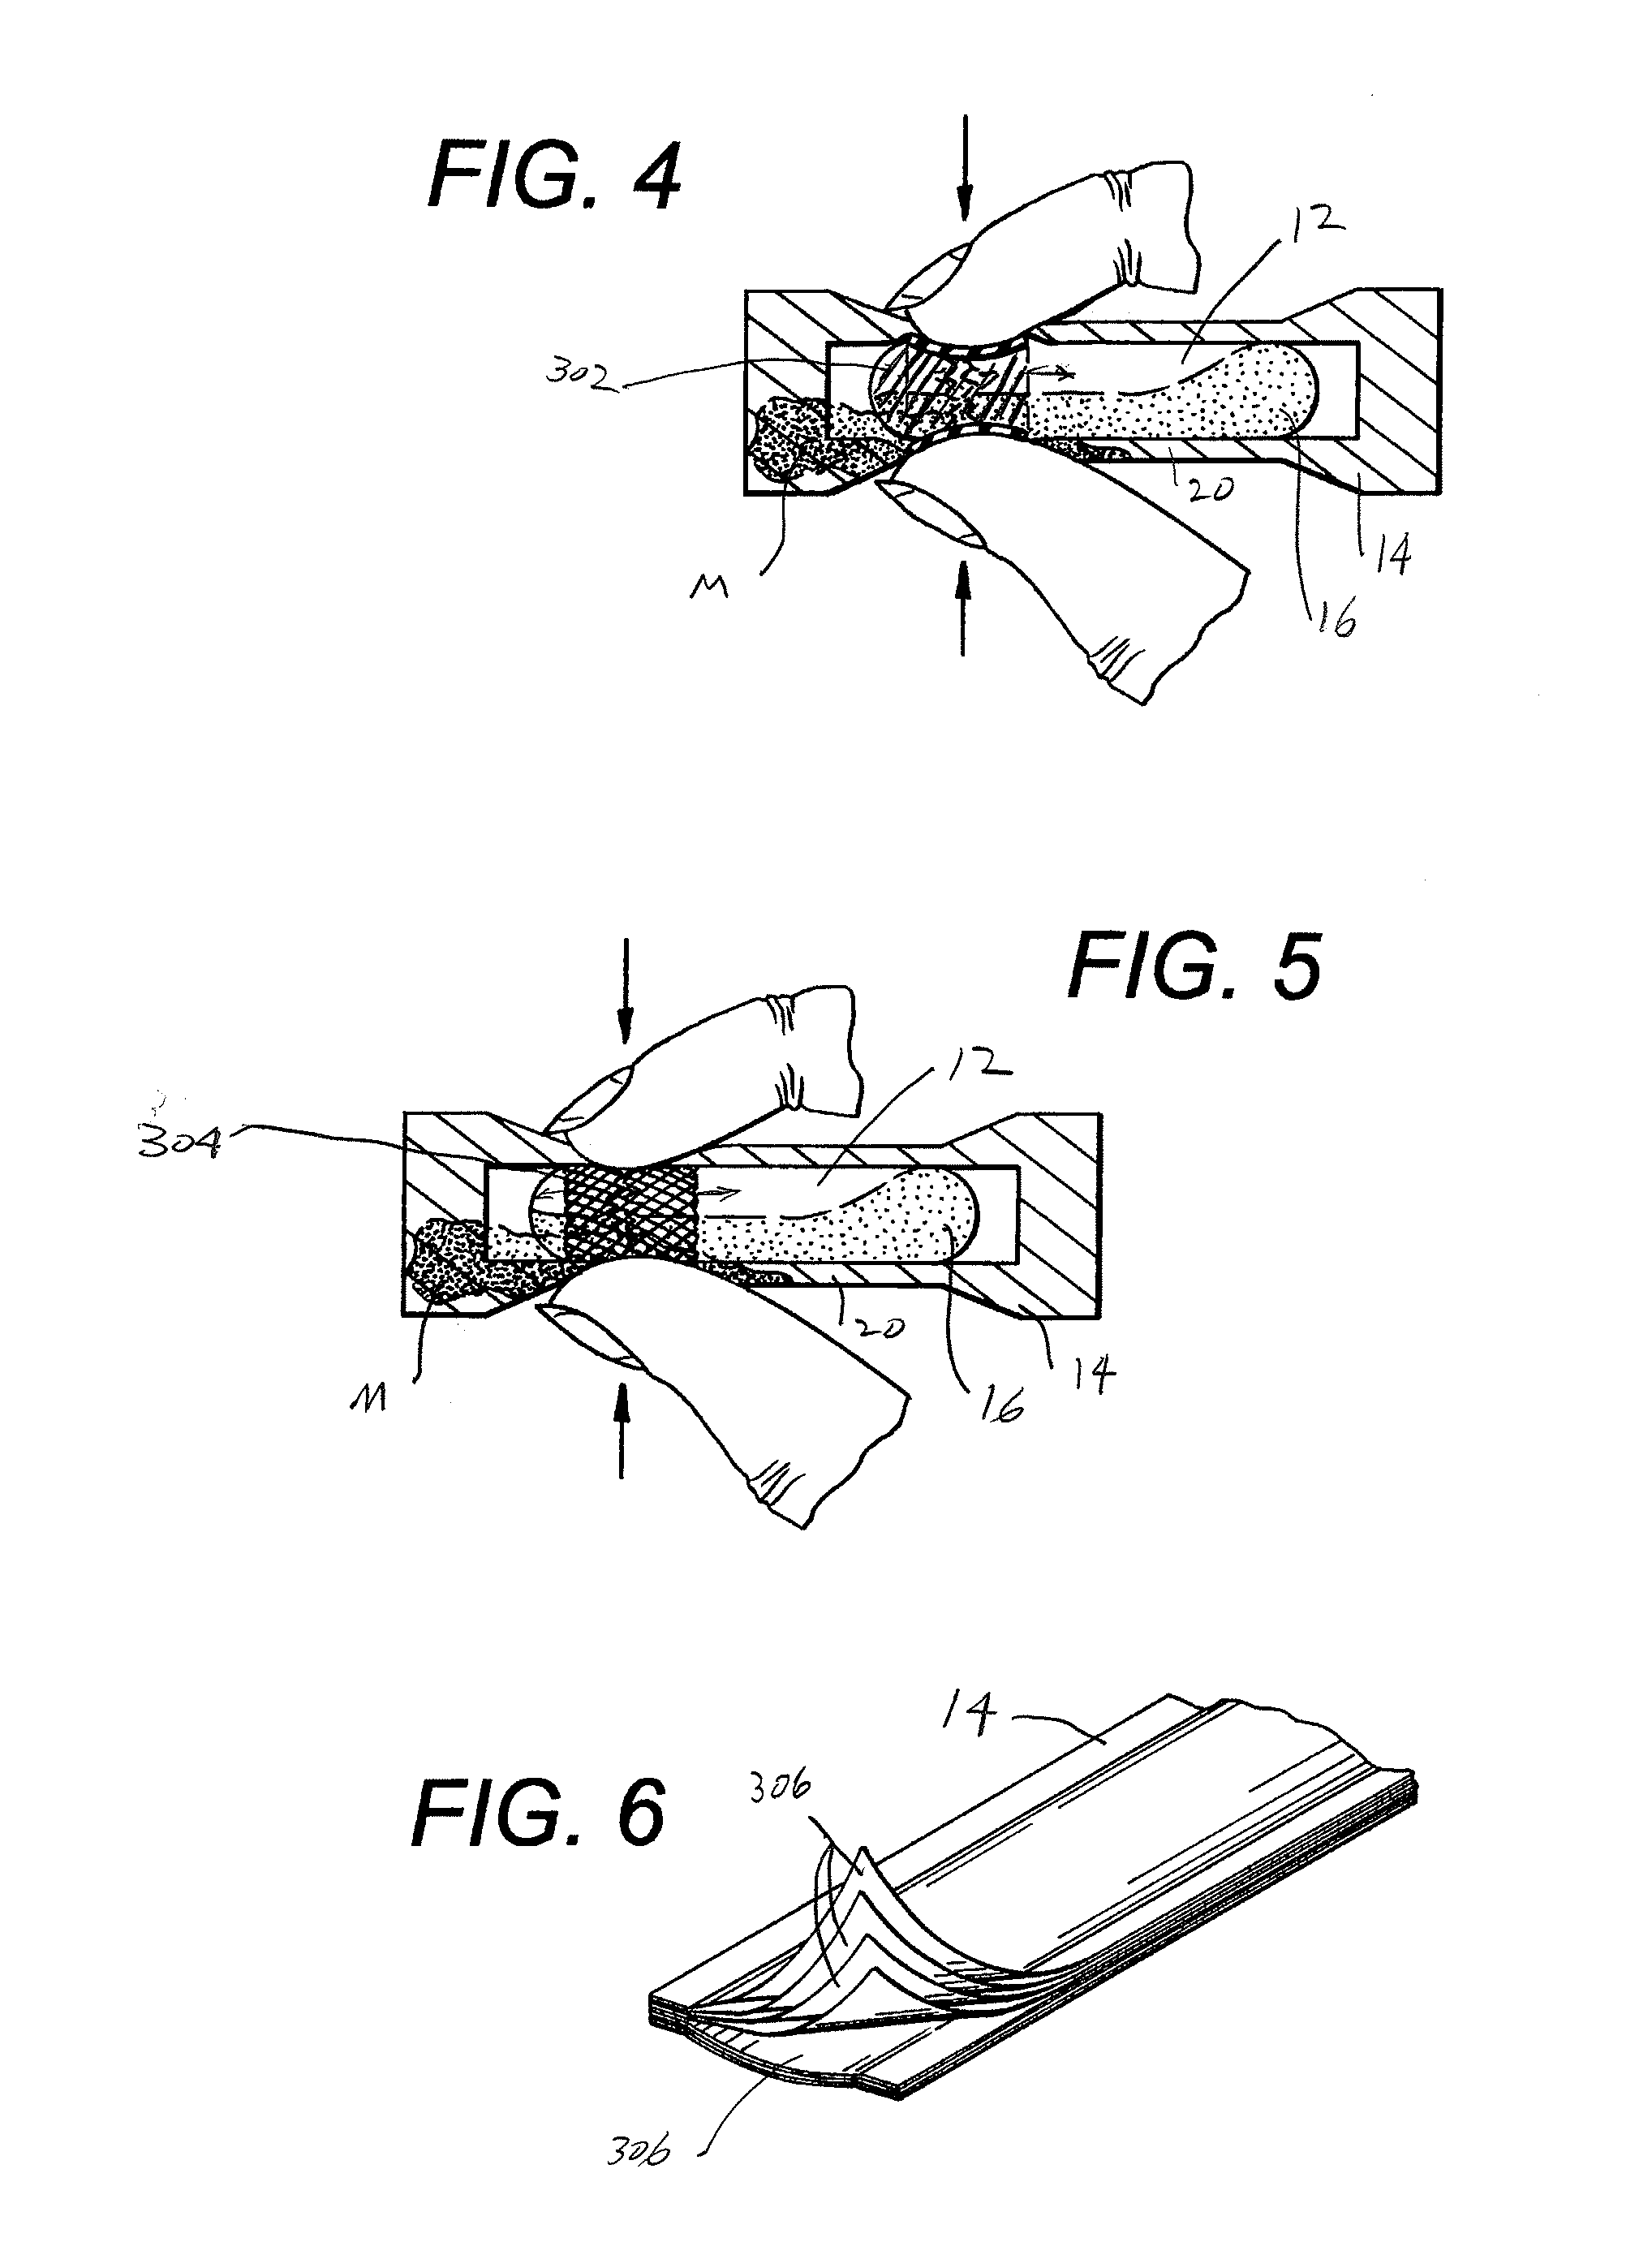 Ampoule dispenser assembly and process